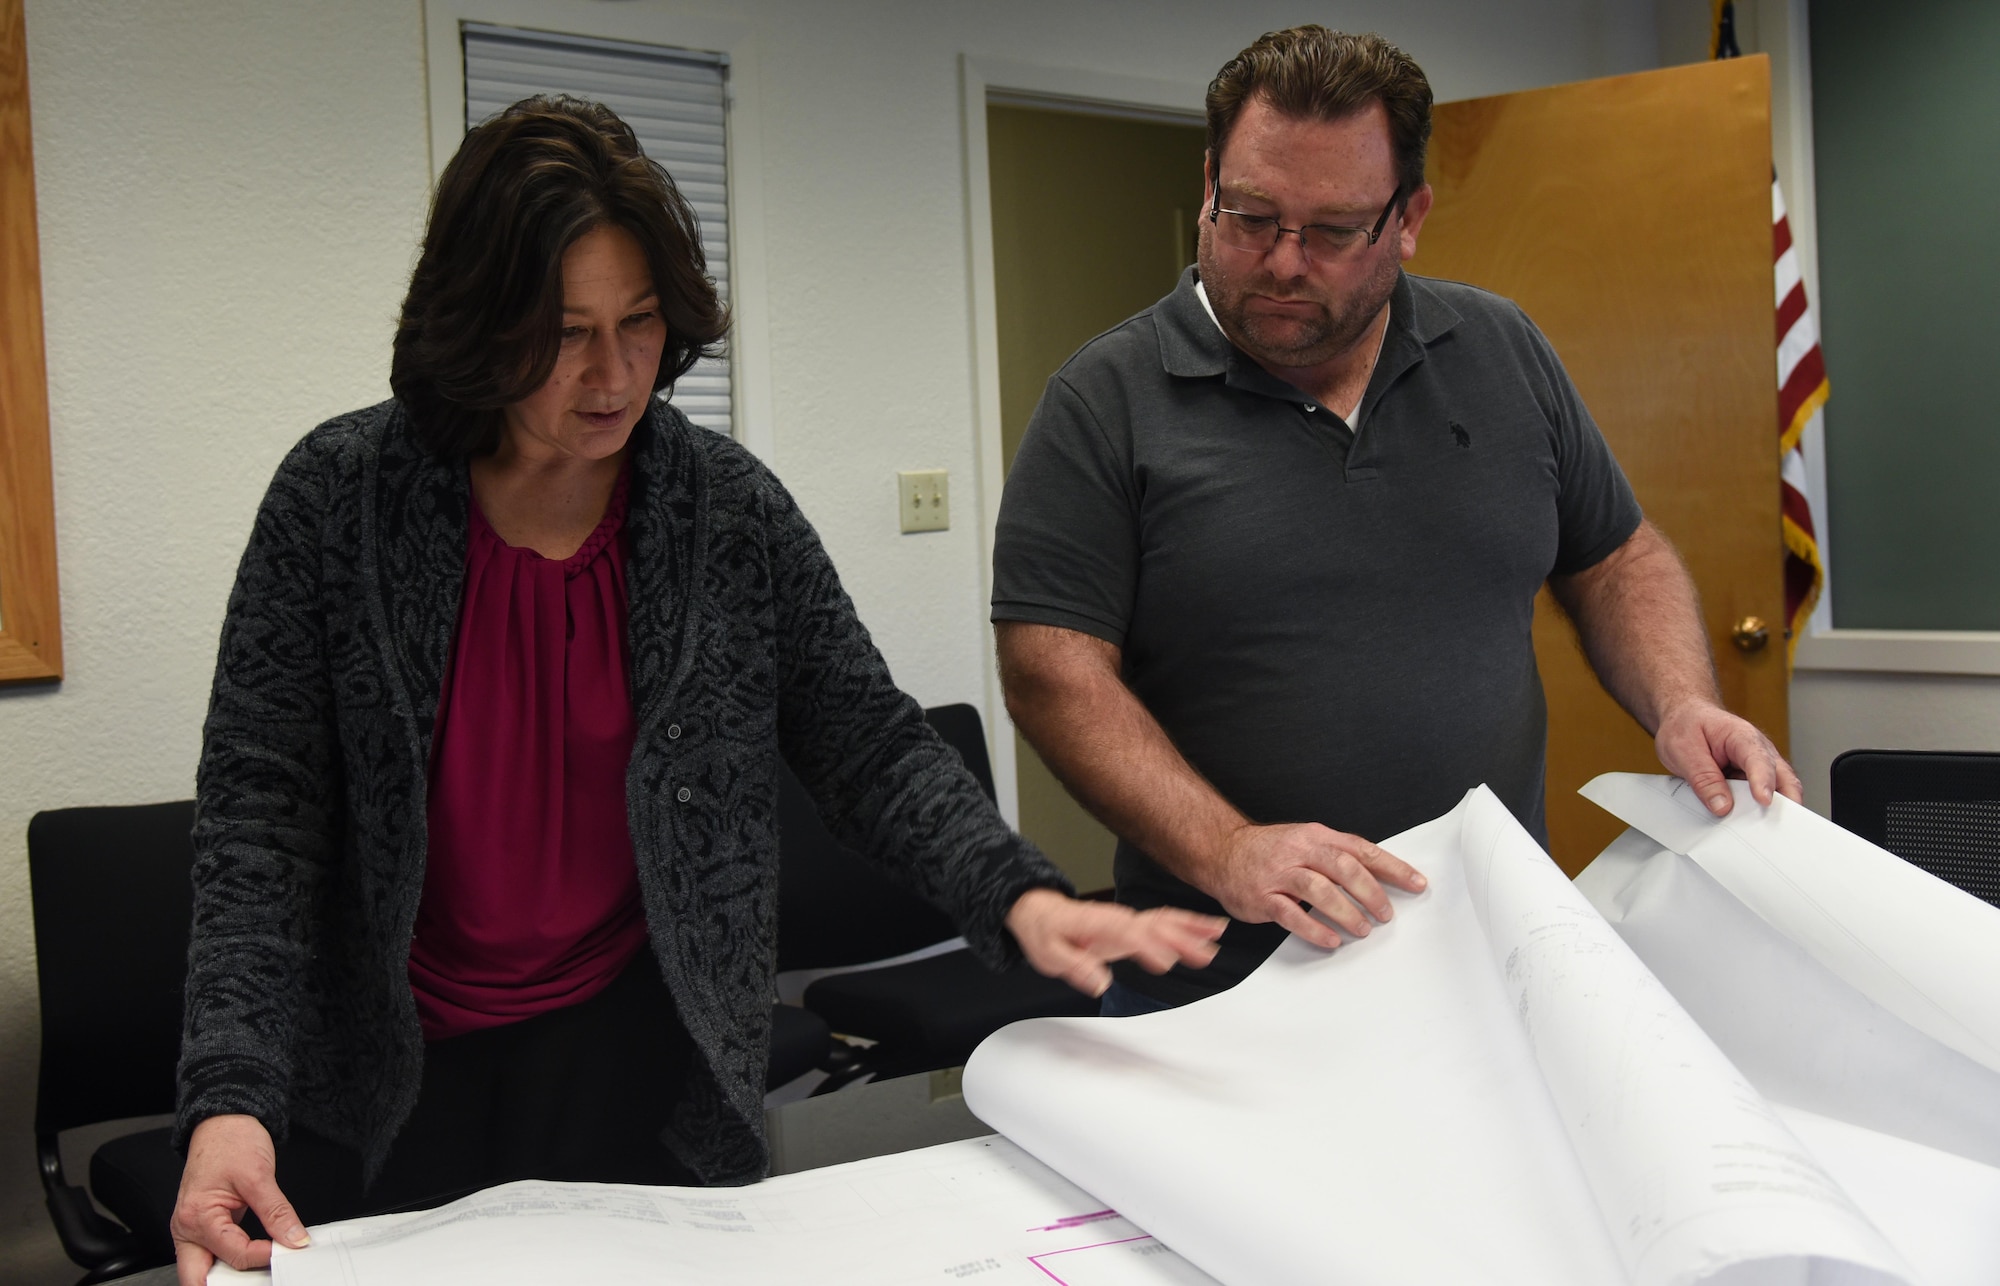 Michele Cardenas, 60th Civil Engineer Squadron operation flight deputy, and Mike West, 60th CES facility systems superintendent, review a print of the David Grant USAF Medical Center at Travis Air Force Base, Calif., March 2, 2017. Cardenas started working in the 60th CES during an initiative to hire women into craftsmen positions. (U.S. Air Force photo by Senior Airman Sam Salopek) (This image was blurred for security purposes) 